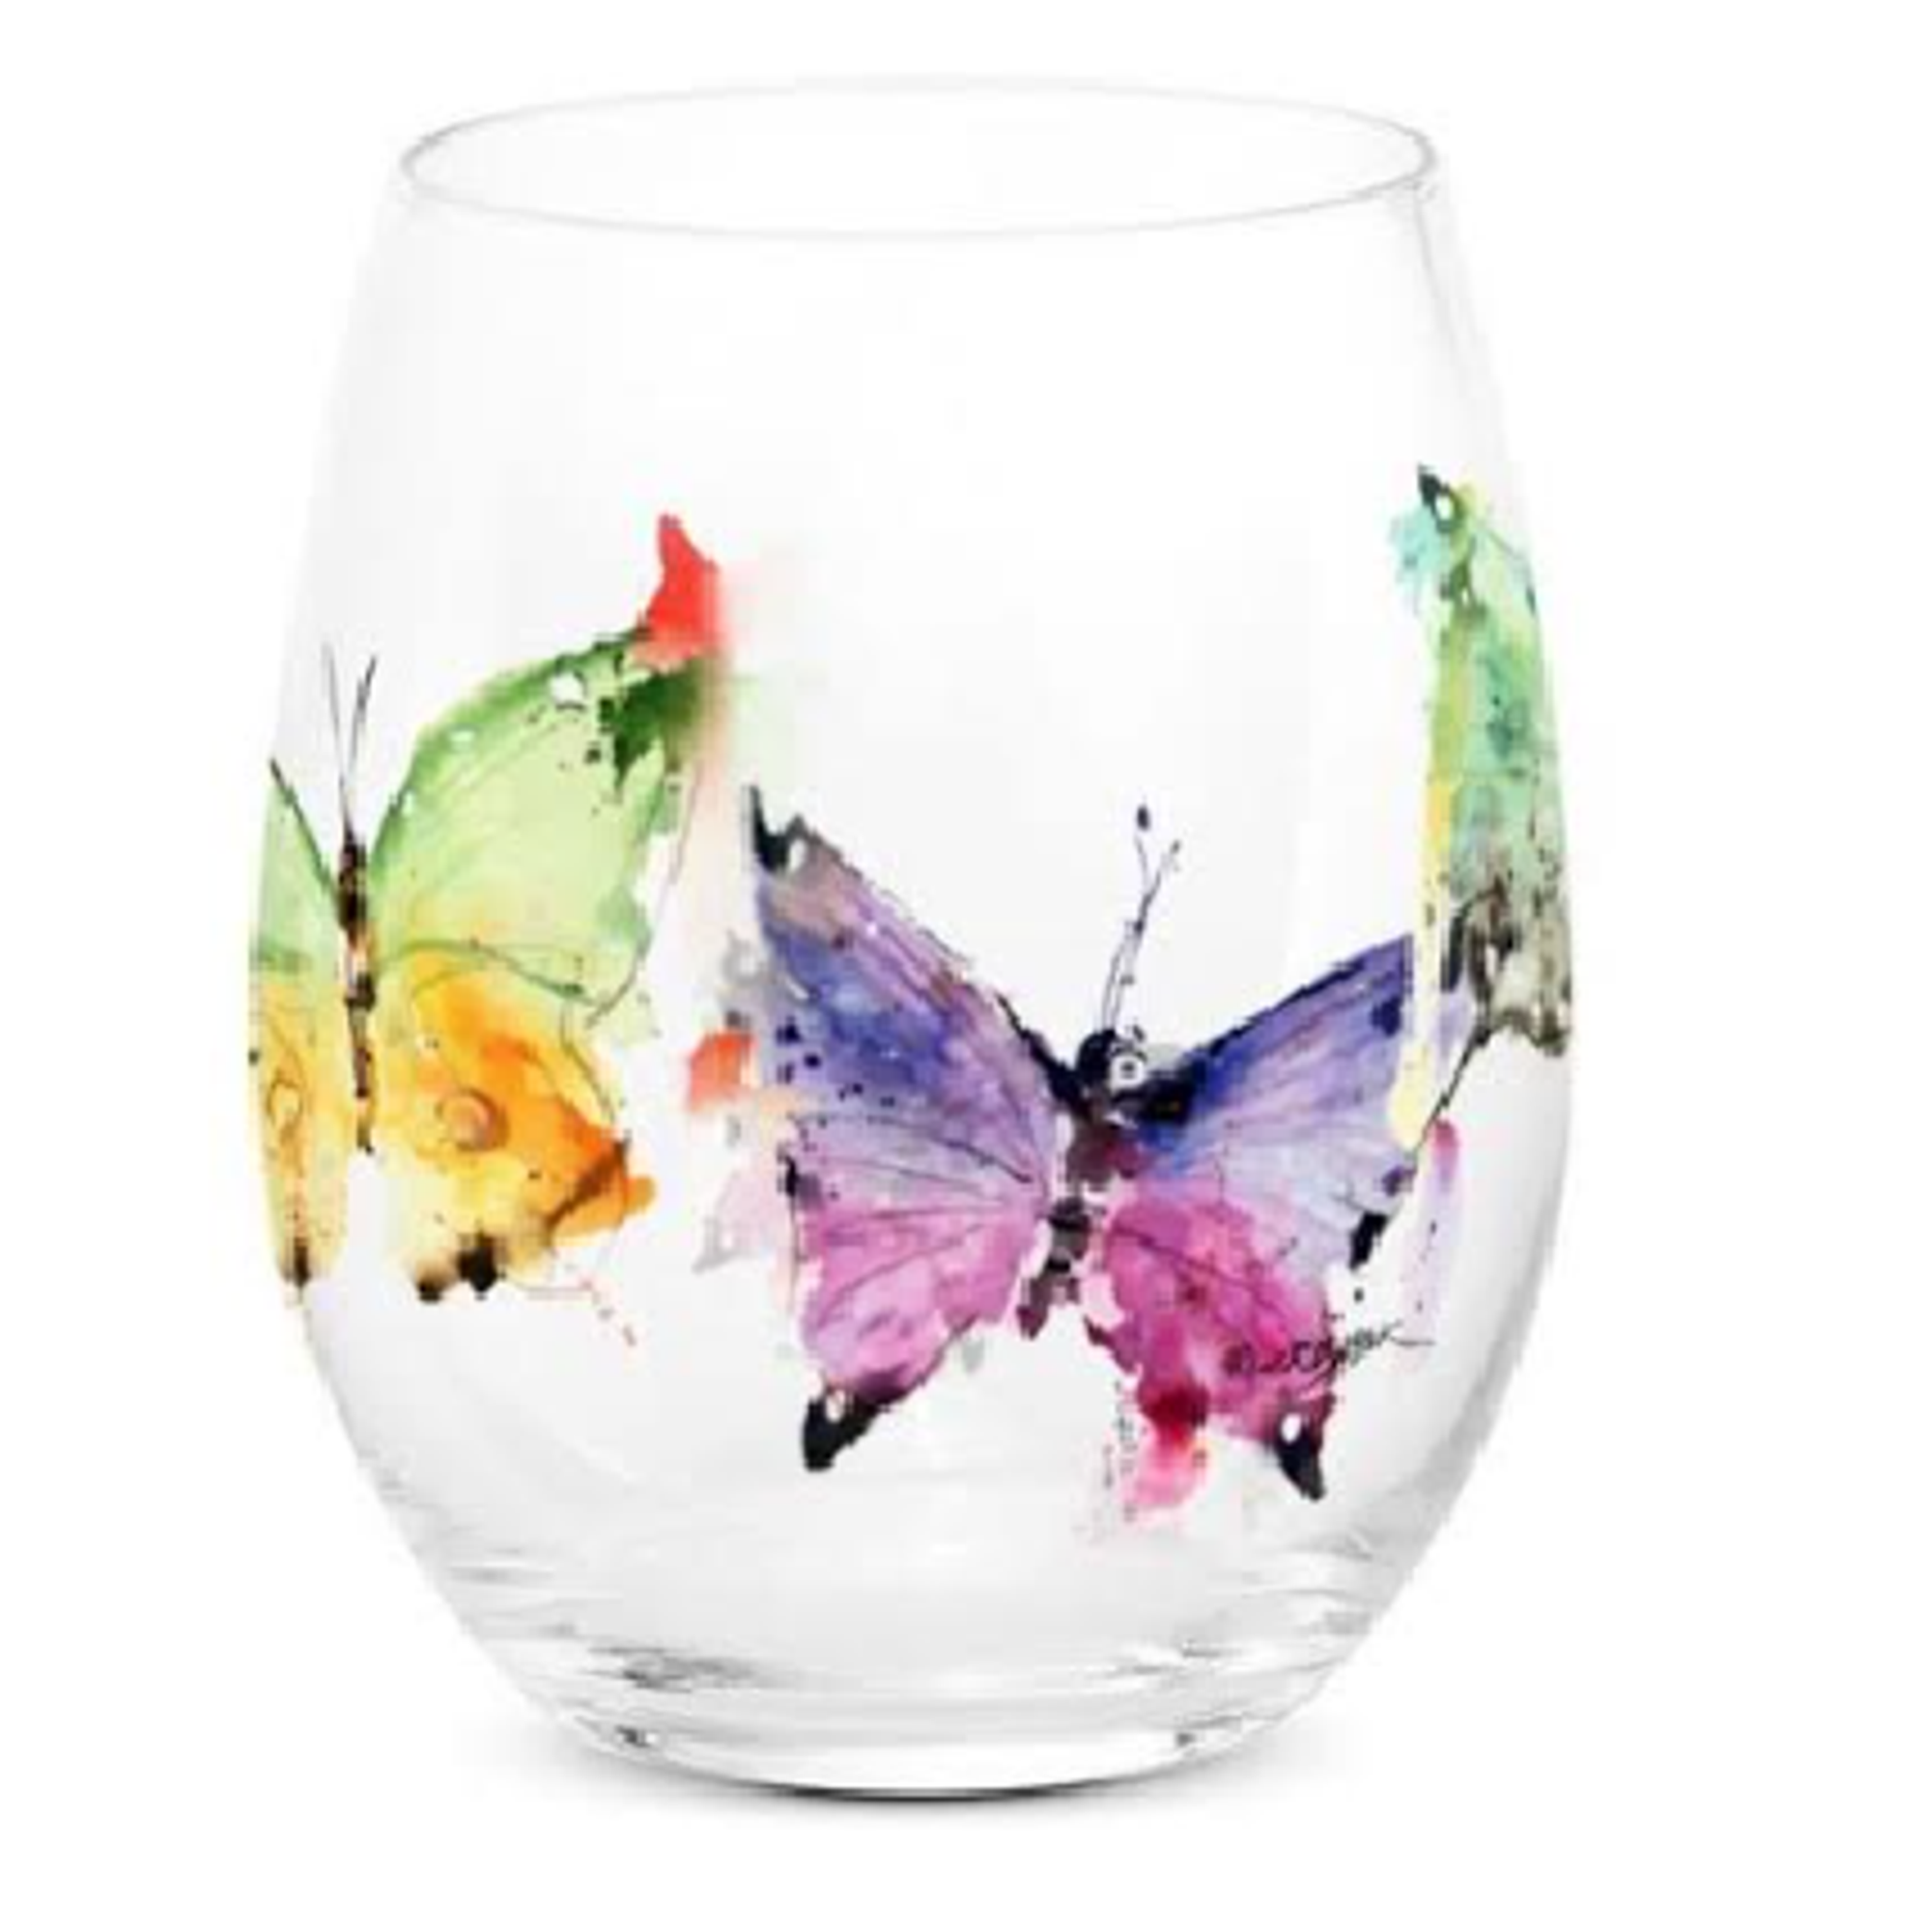 https://cdn11.bigcommerce.com/s-ob7m2s98/images/stencil/2000x2000/products/19987/73431/butterfly_stemless__21287.1674783081.png?c=2